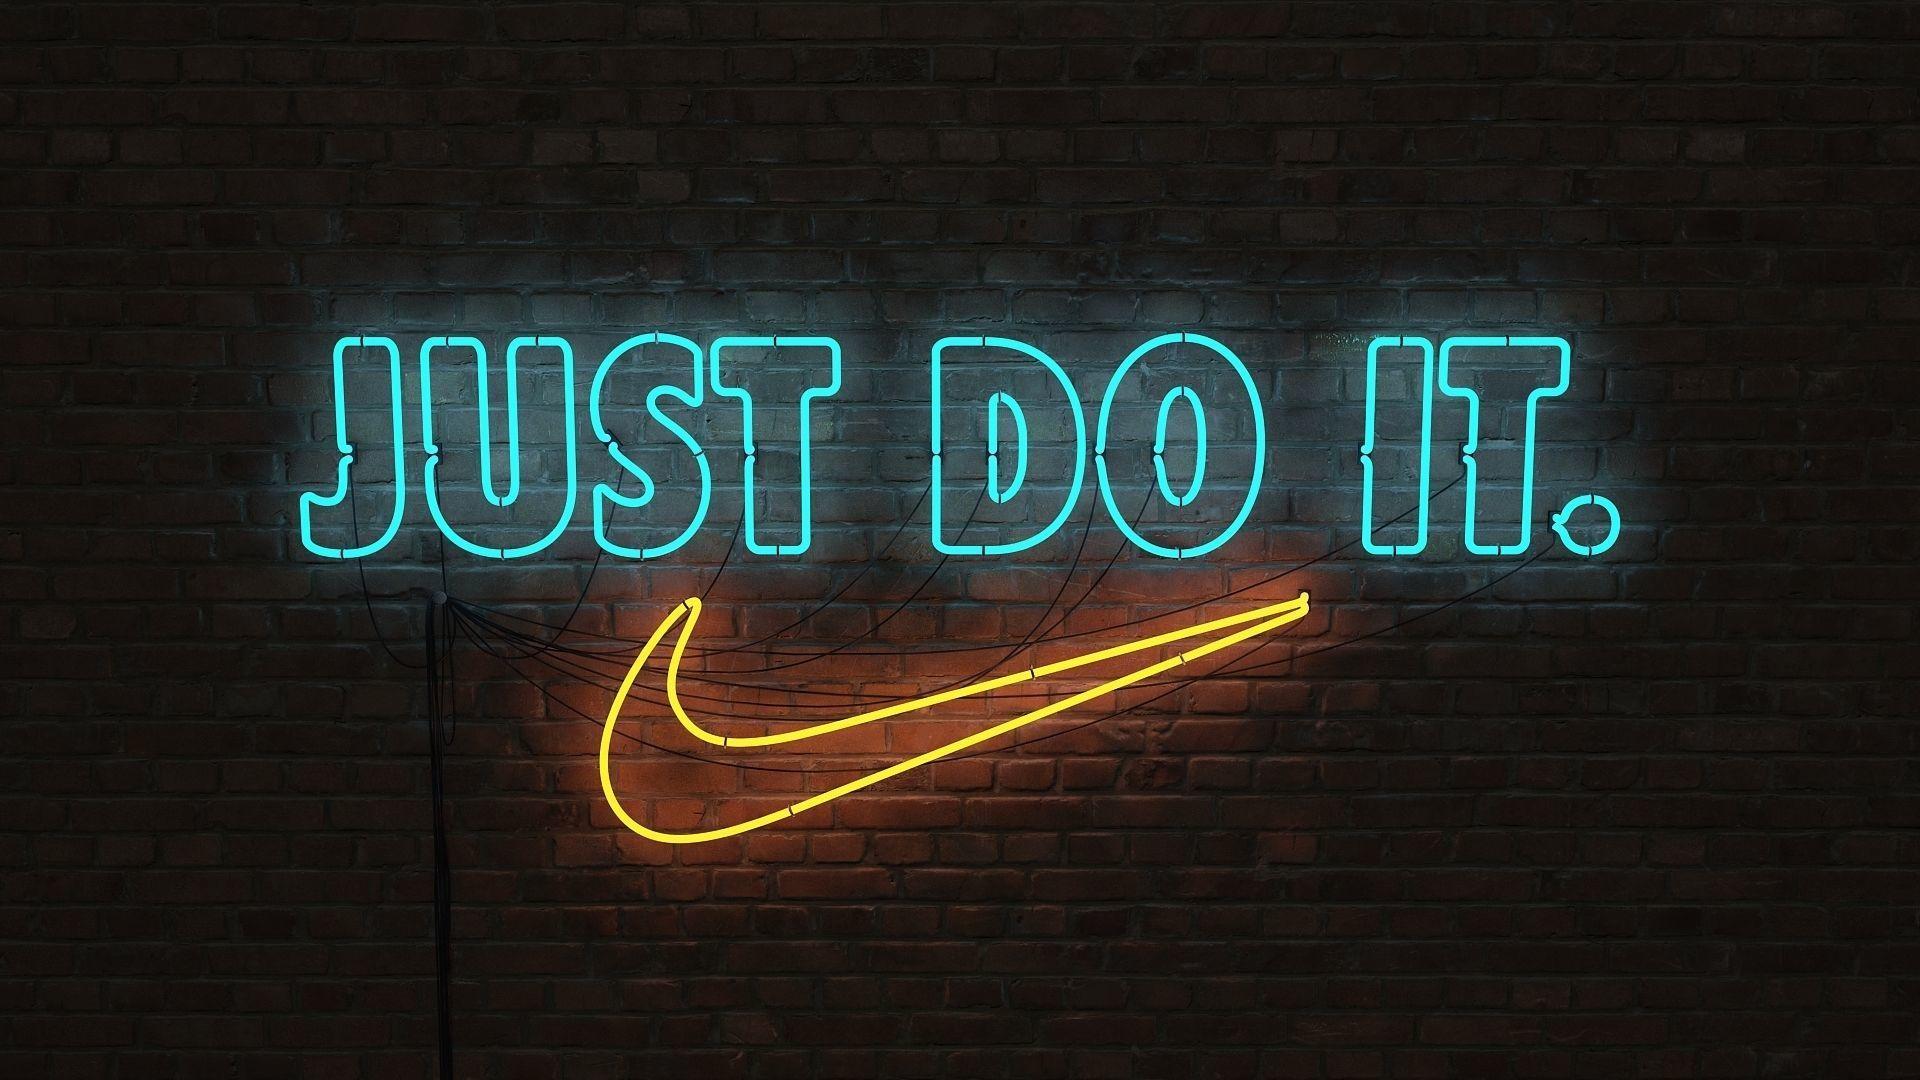 Nike Just Do It Logo - logo sign Nike Just do it 3D VR / AR ready